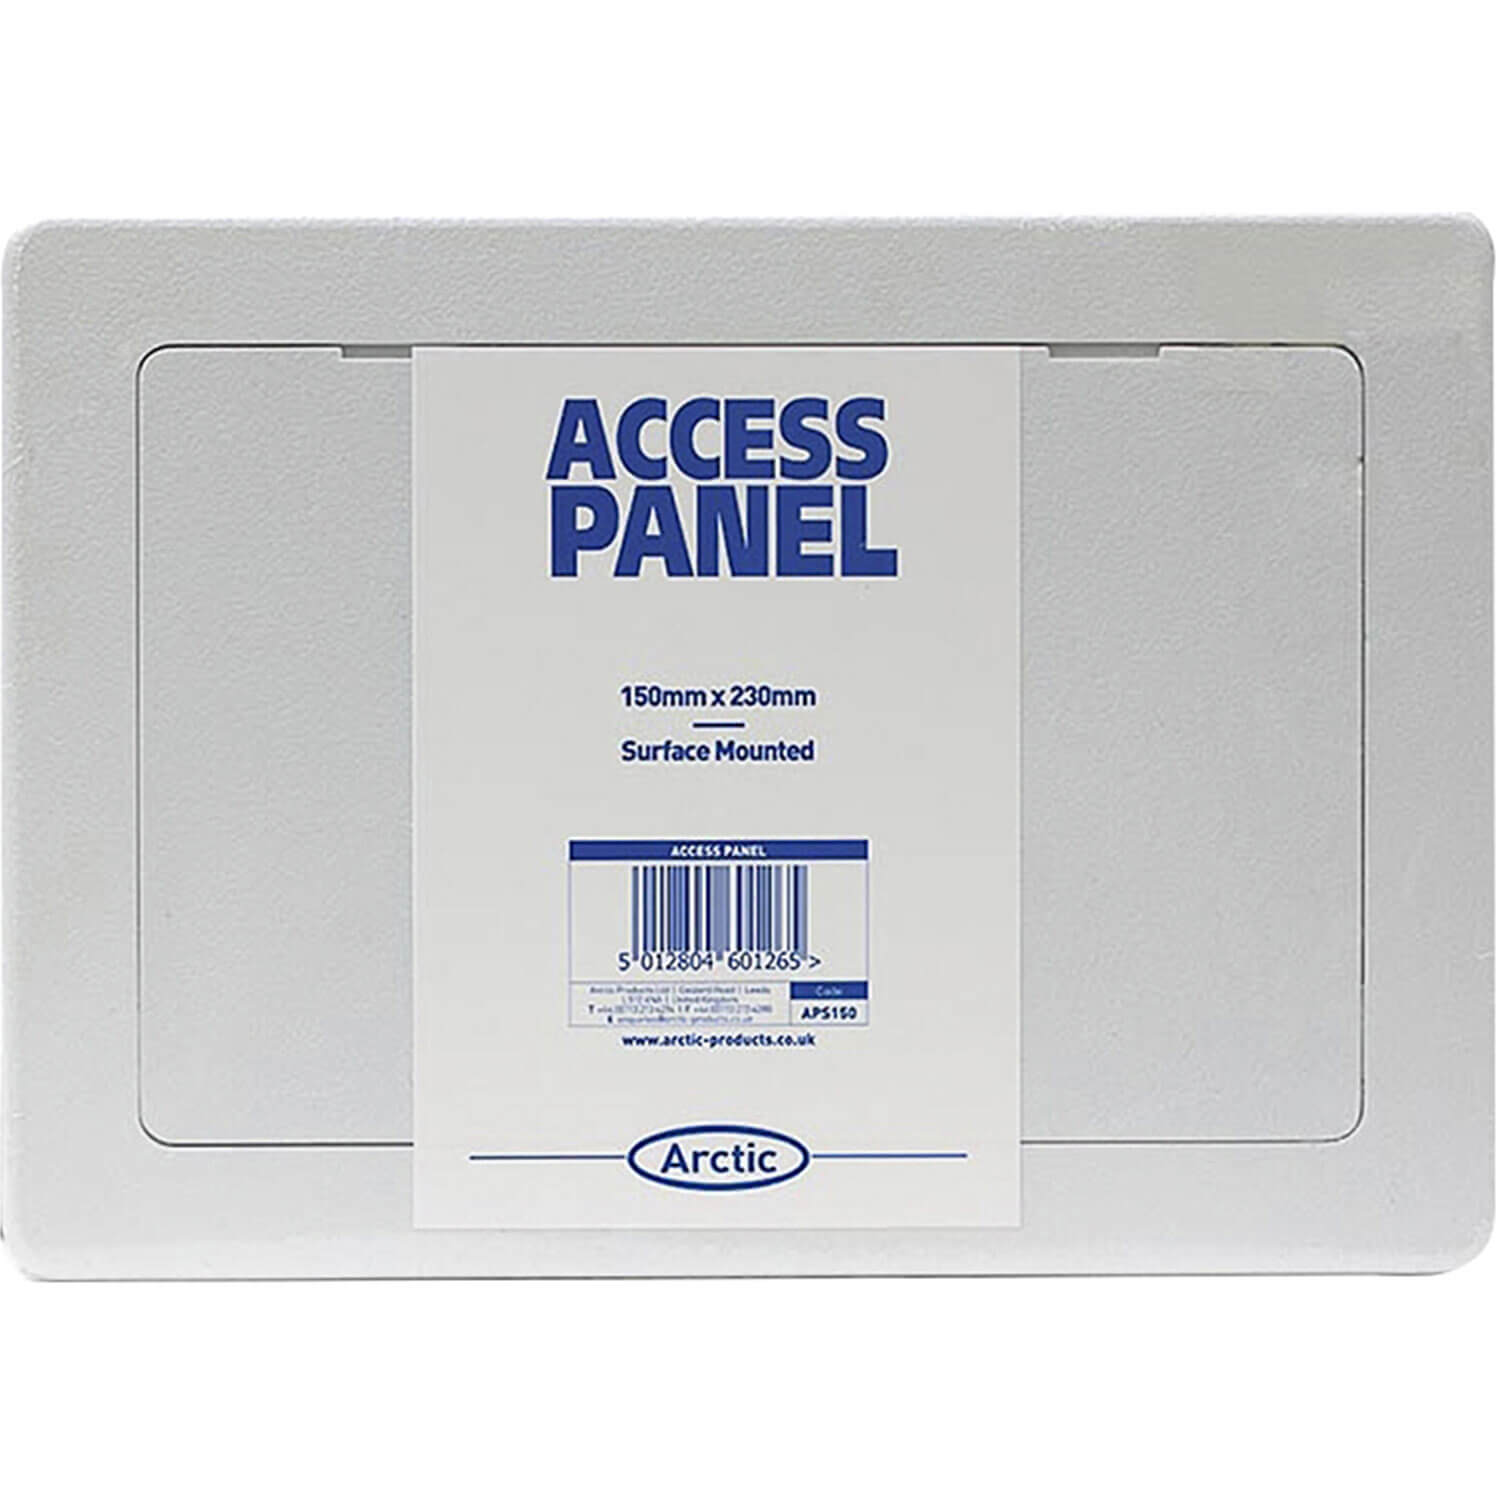 Image of Arctic Hayes Access Panel 150mm 230mm